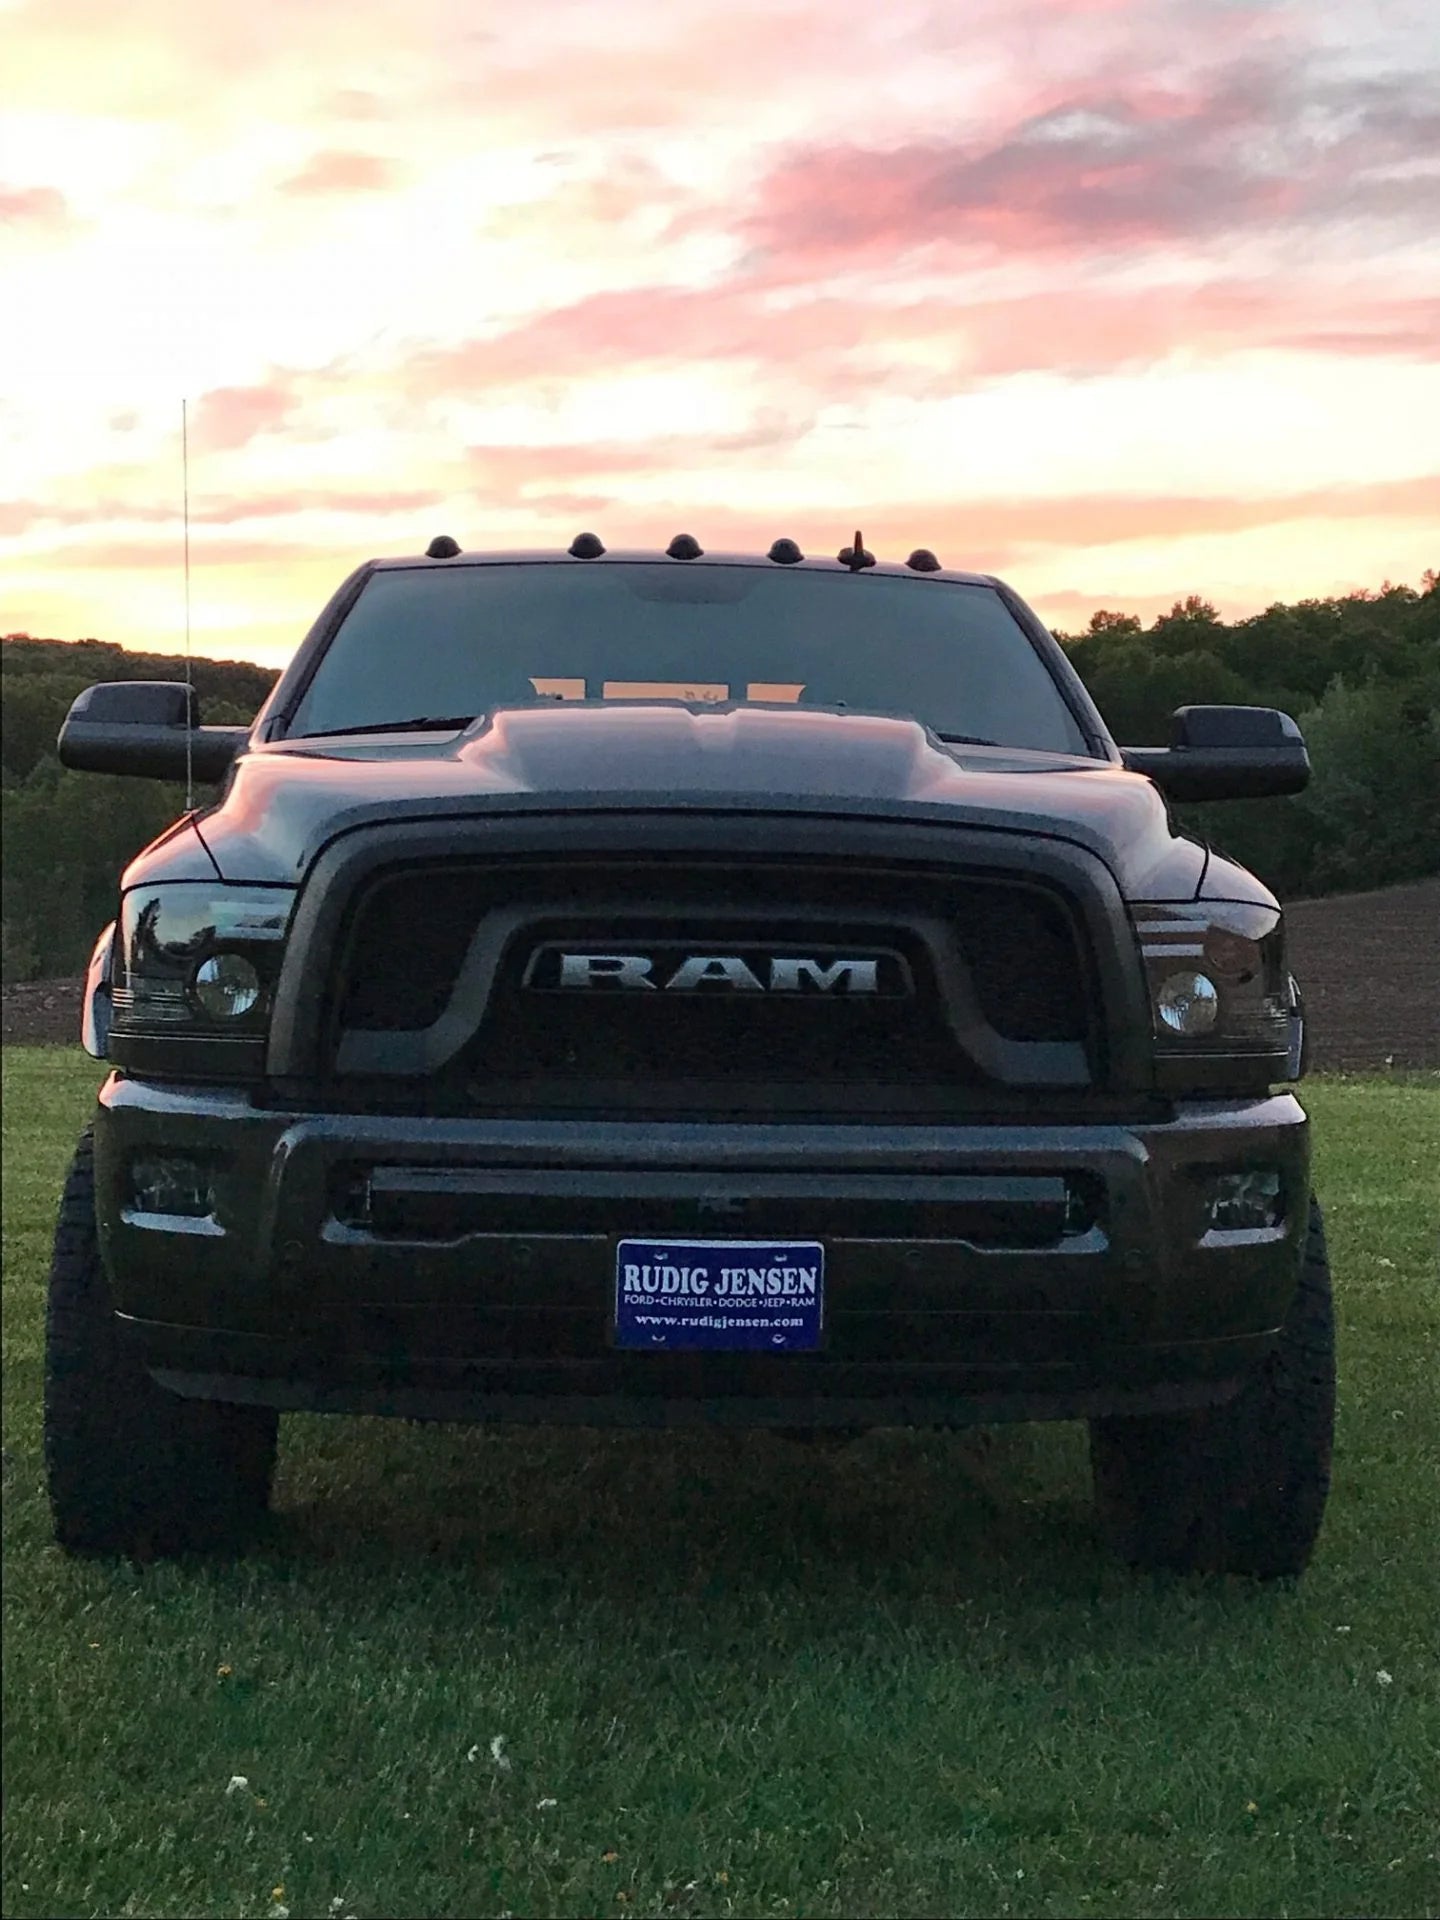 Recon USA Projector Headlights OLED DRL & LED Signals in Smoked/Black (RAM 1500 2014-2019 & 2500/3500 2015-2018)